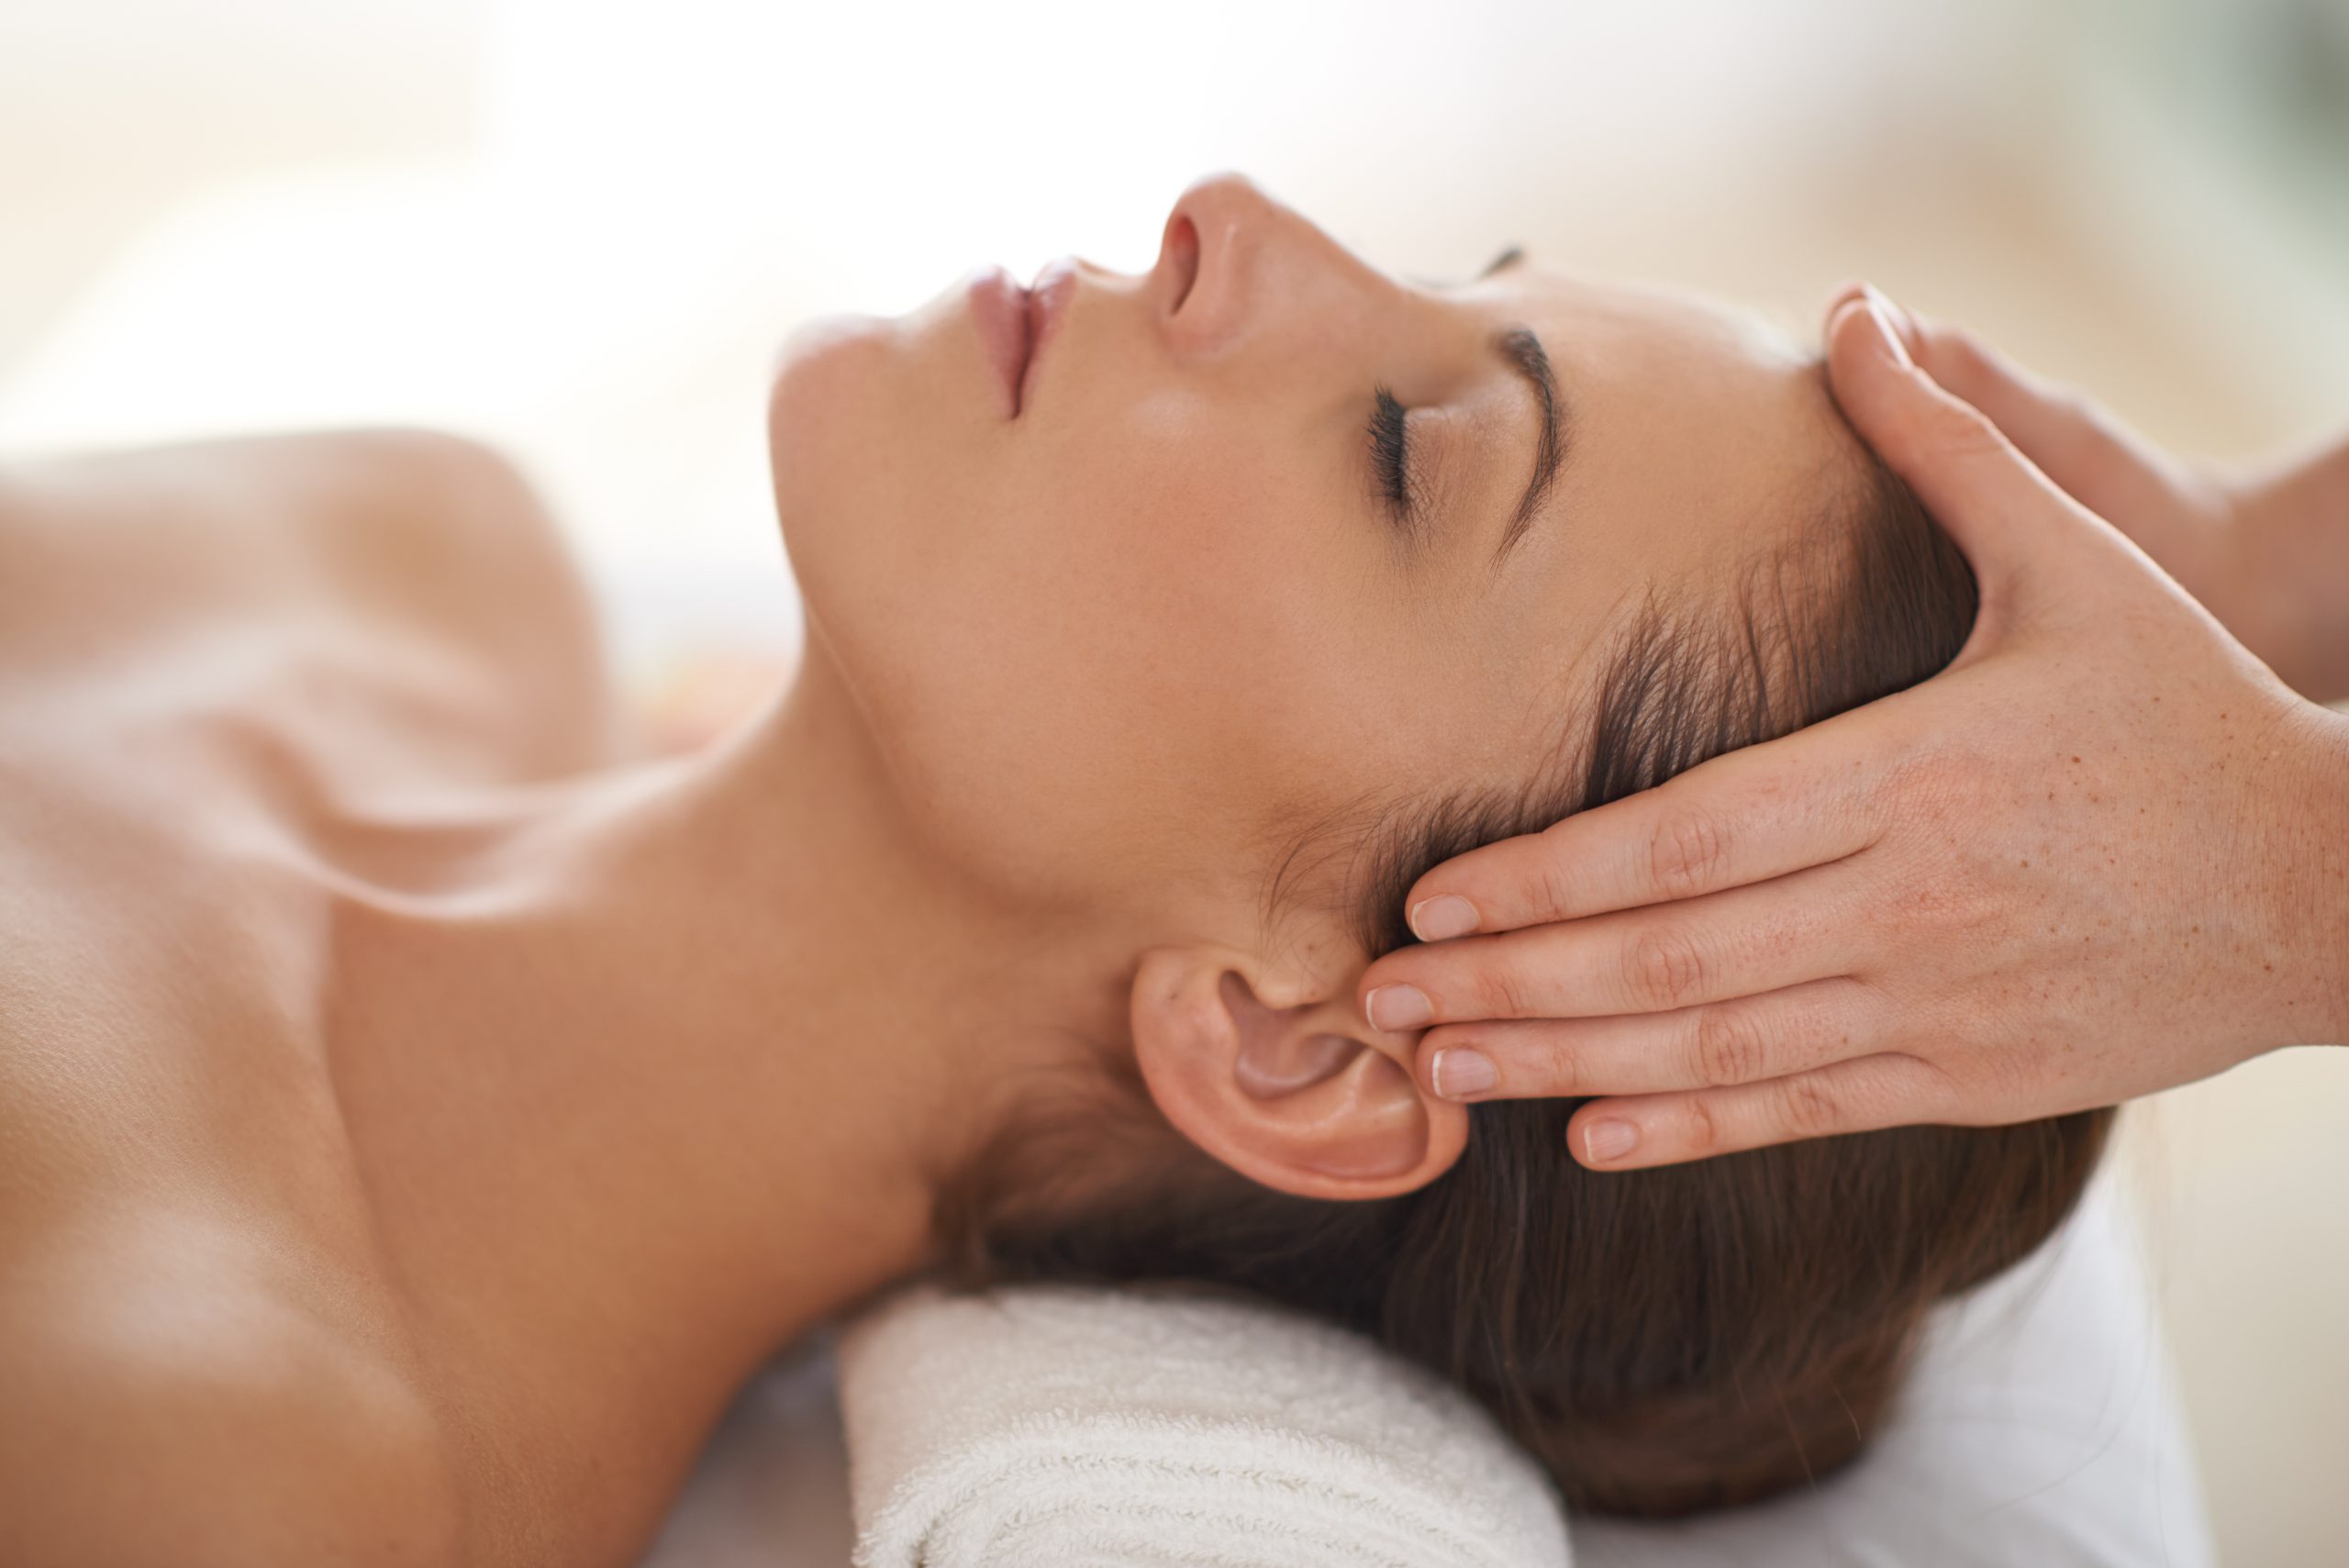 Pure relaxation. Close up shot of a young woman receiving a head massage at a spa.